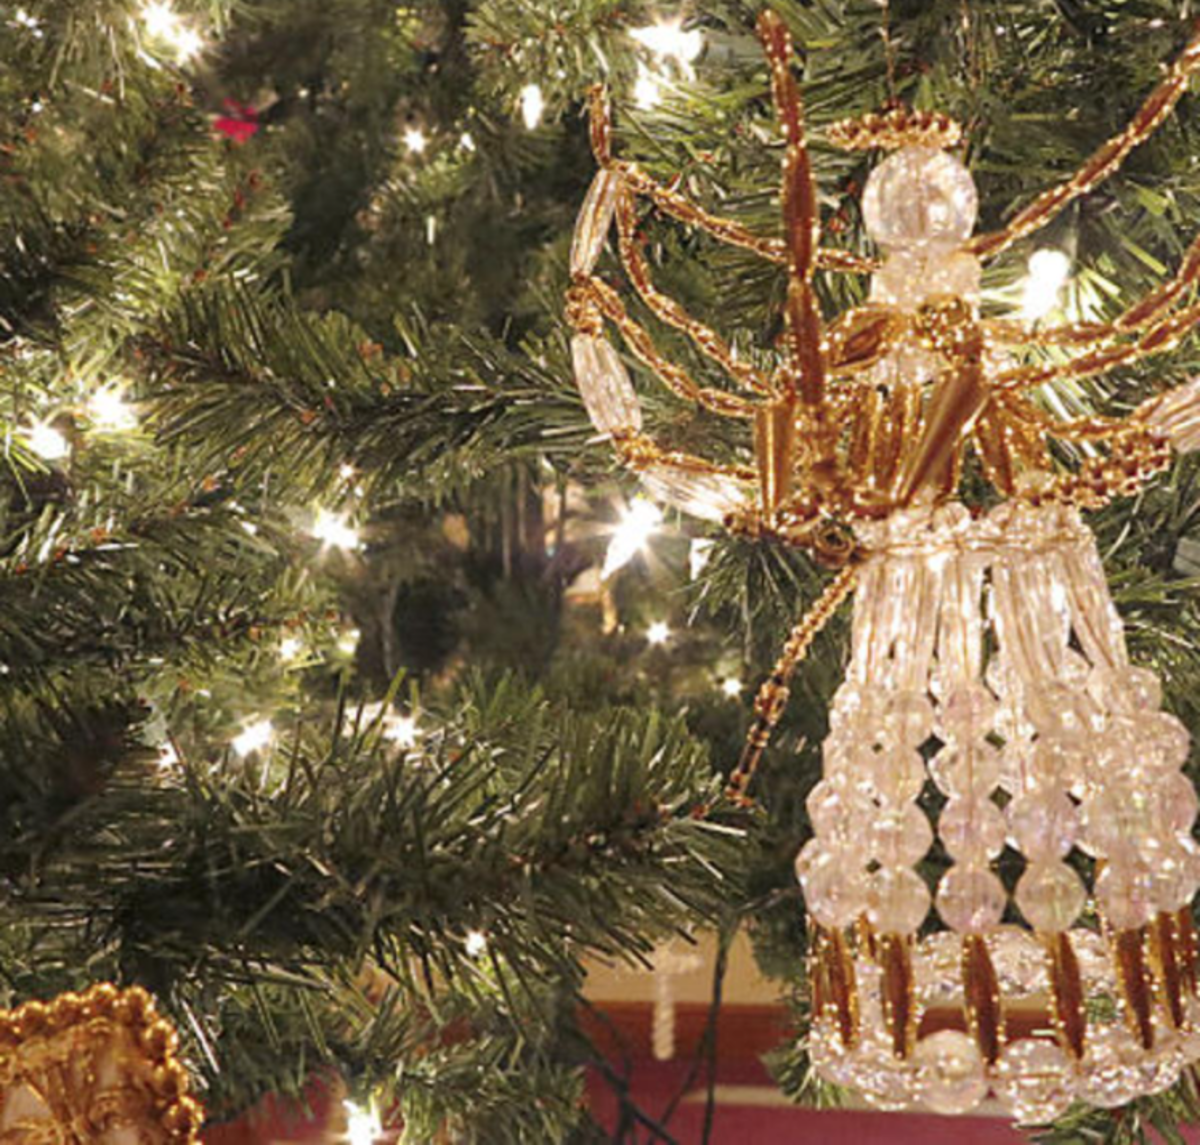 What Are Chrismon Ornaments? 24 Ornaments and Their Meanings